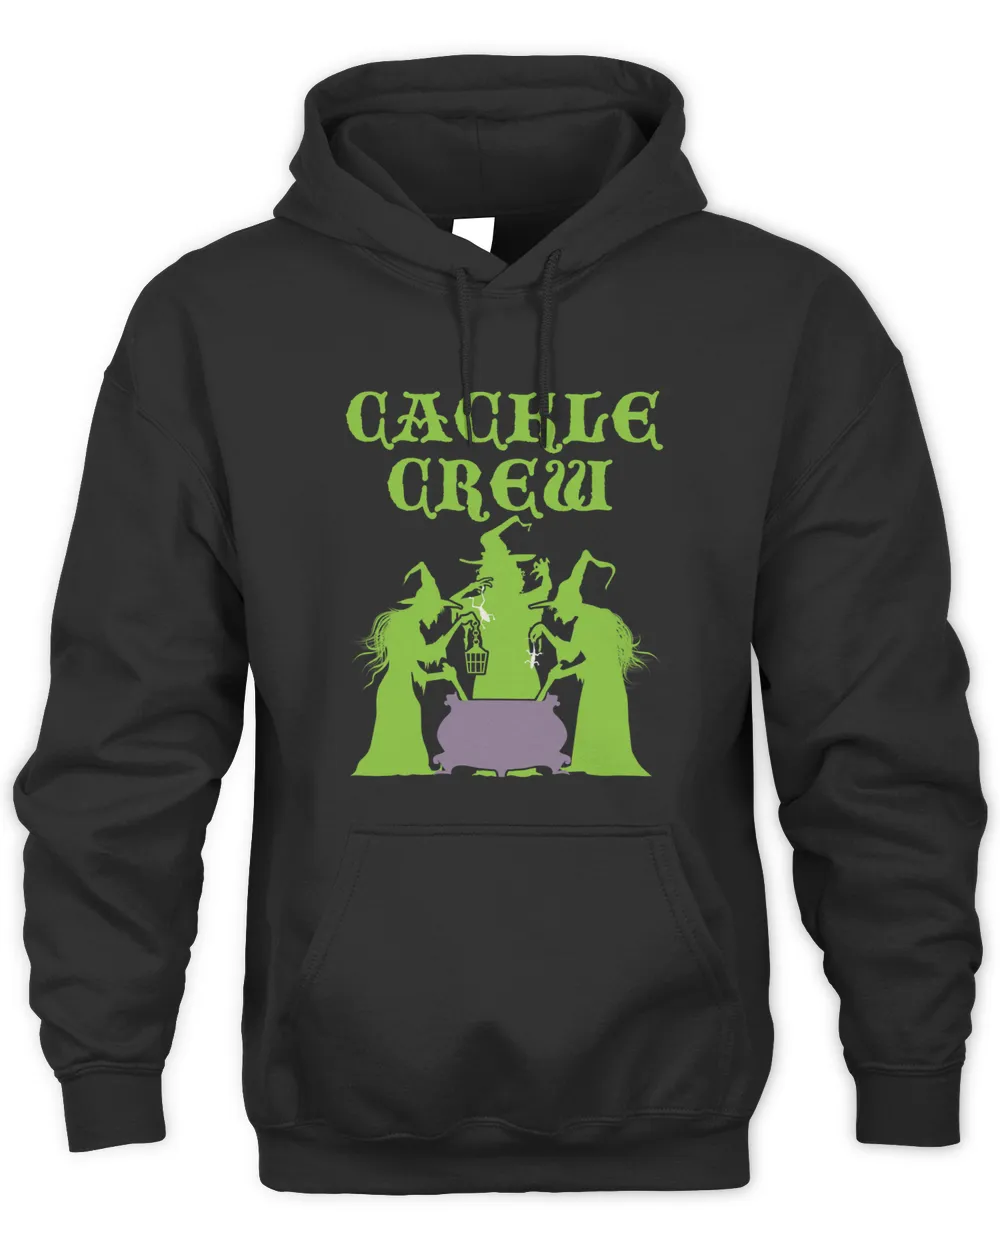 Cackle Crew Medieval Witch Halloween Cauldron Women Graphic